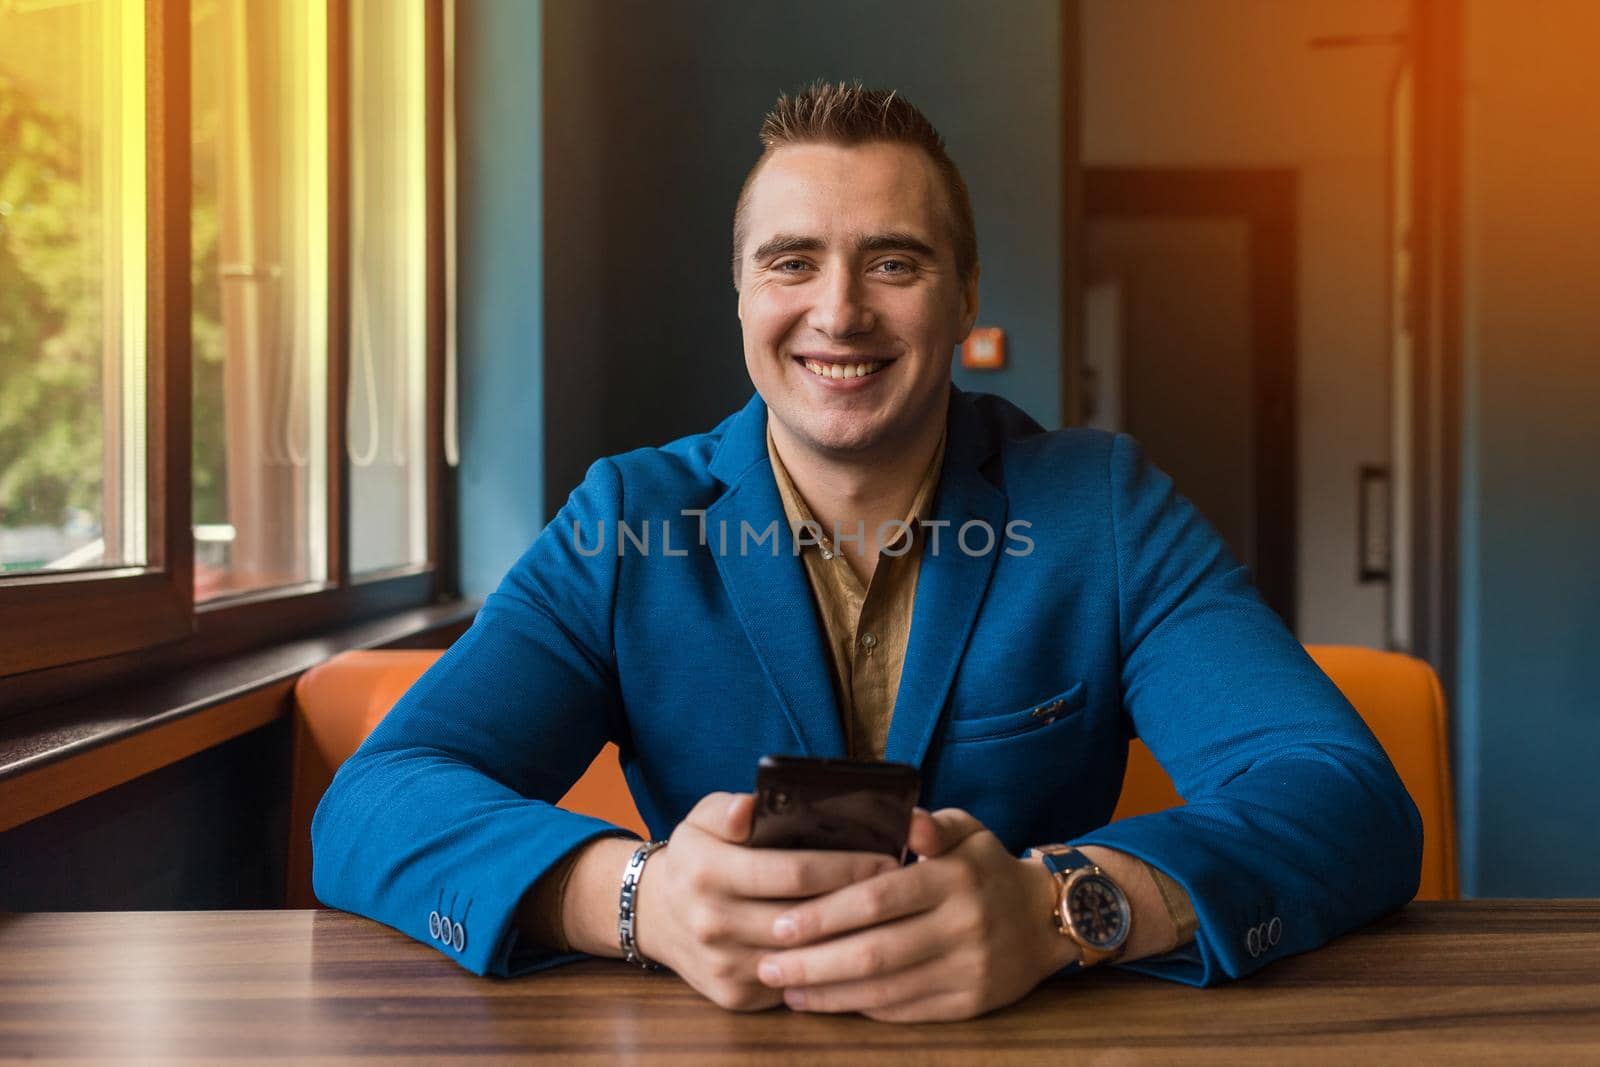 Smiling stylish young, businessman of European appearance portrait of a man in a jacket and shirt sits at a table and uses a mobile phone in a cafe.